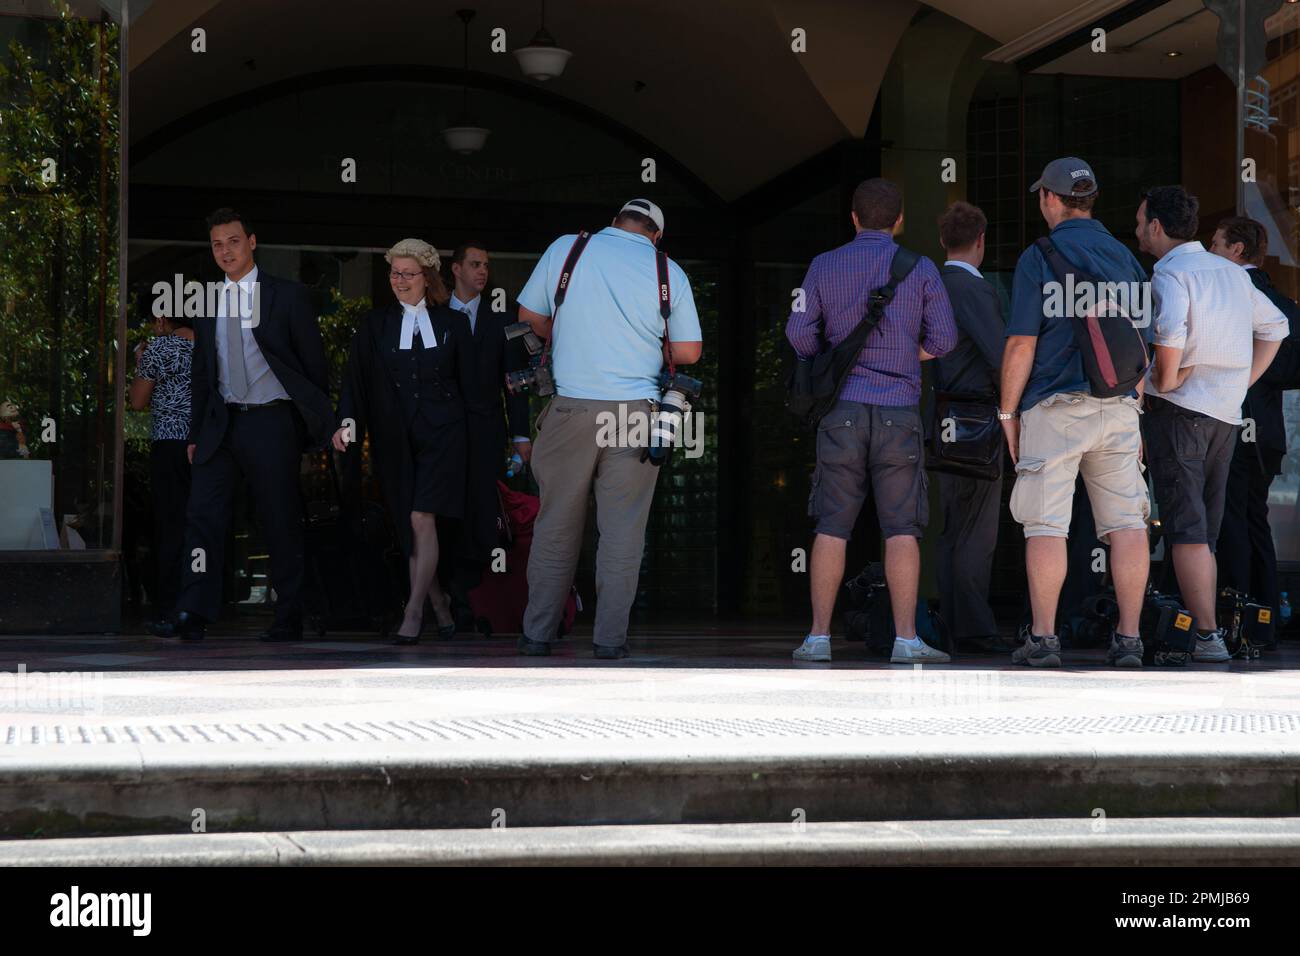 Sydney Australia - January 26 2011; Press and photographers on court steps as lawyers emerge from within. Stock Photo